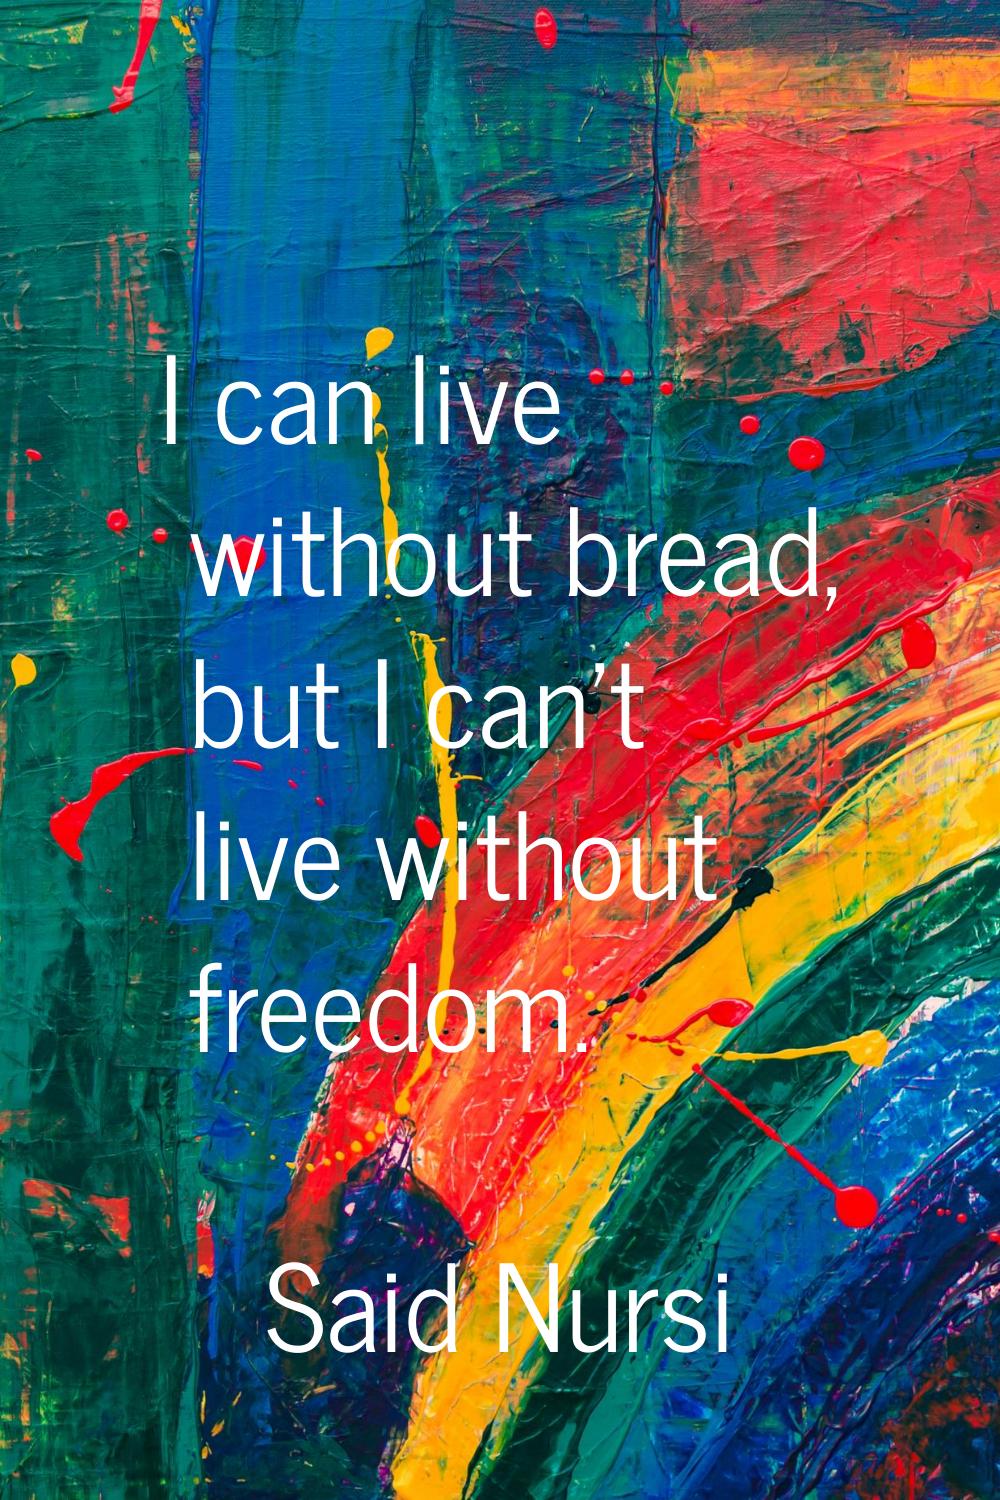 I can live without bread, but I can't live without freedom.